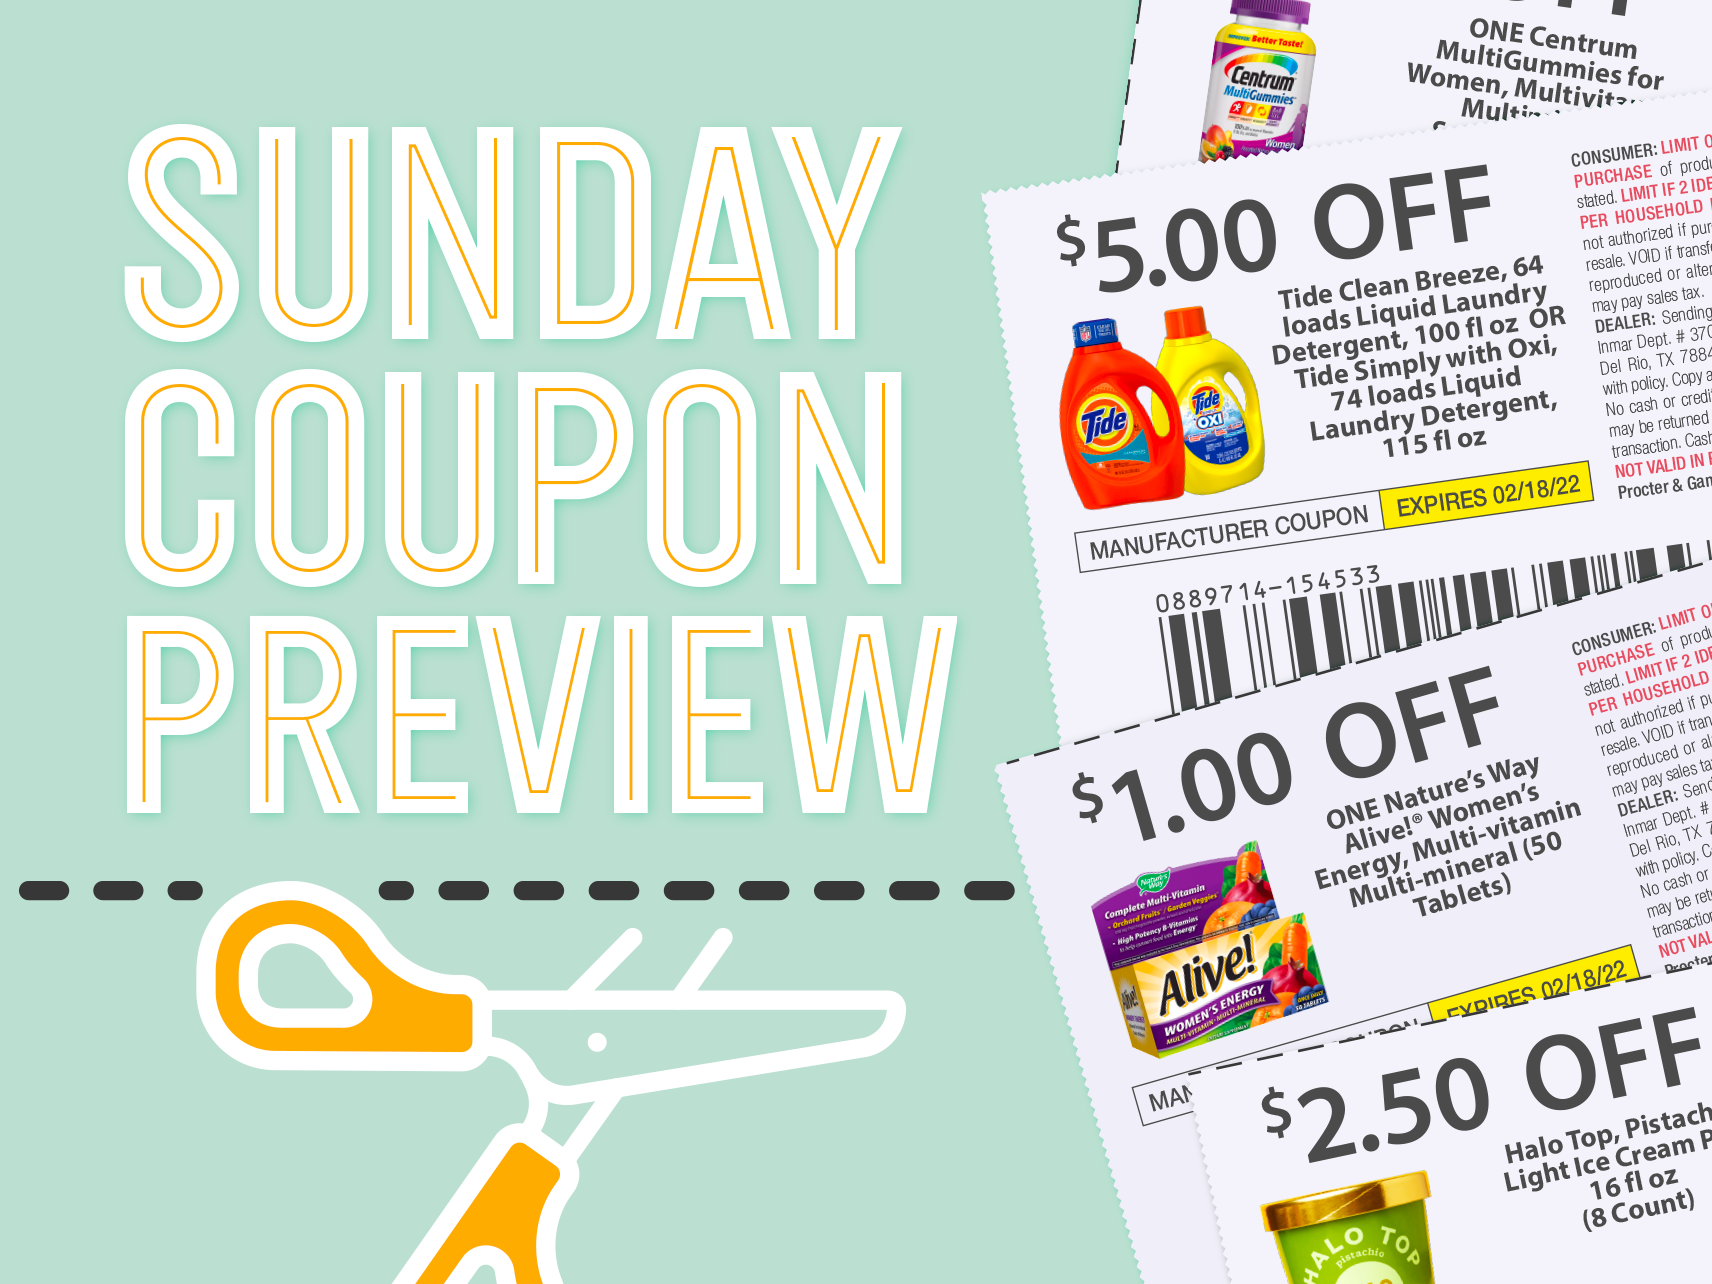 Sunday Coupon Preview For 1/14- One Insert